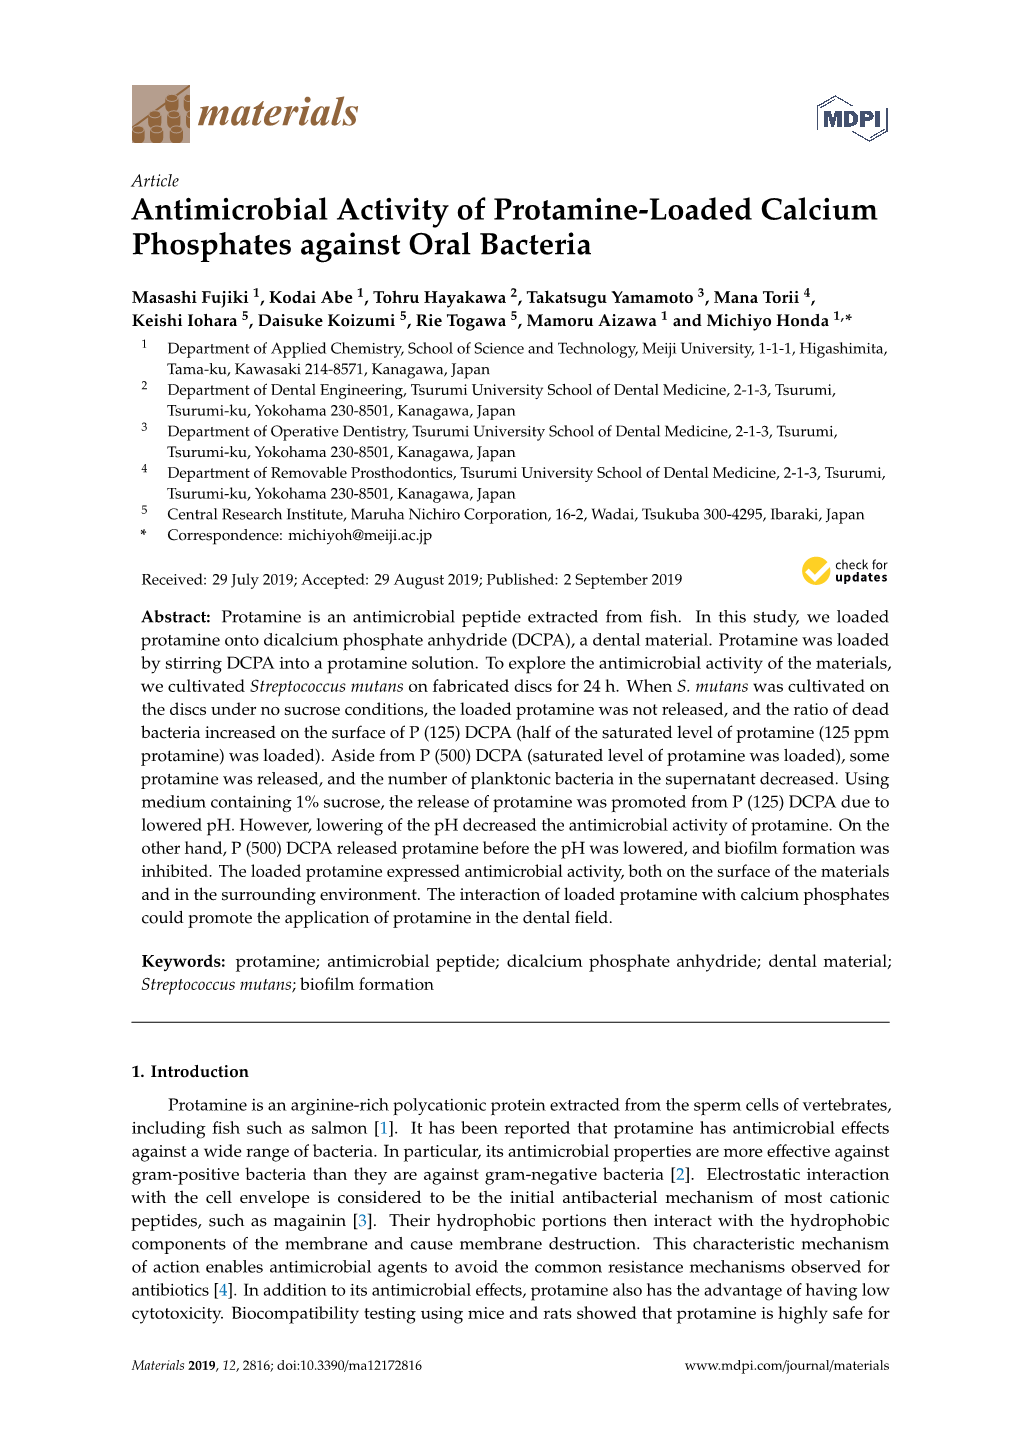 Antimicrobial Activity of Protamine-Loaded Calcium Phosphates Against Oral Bacteria